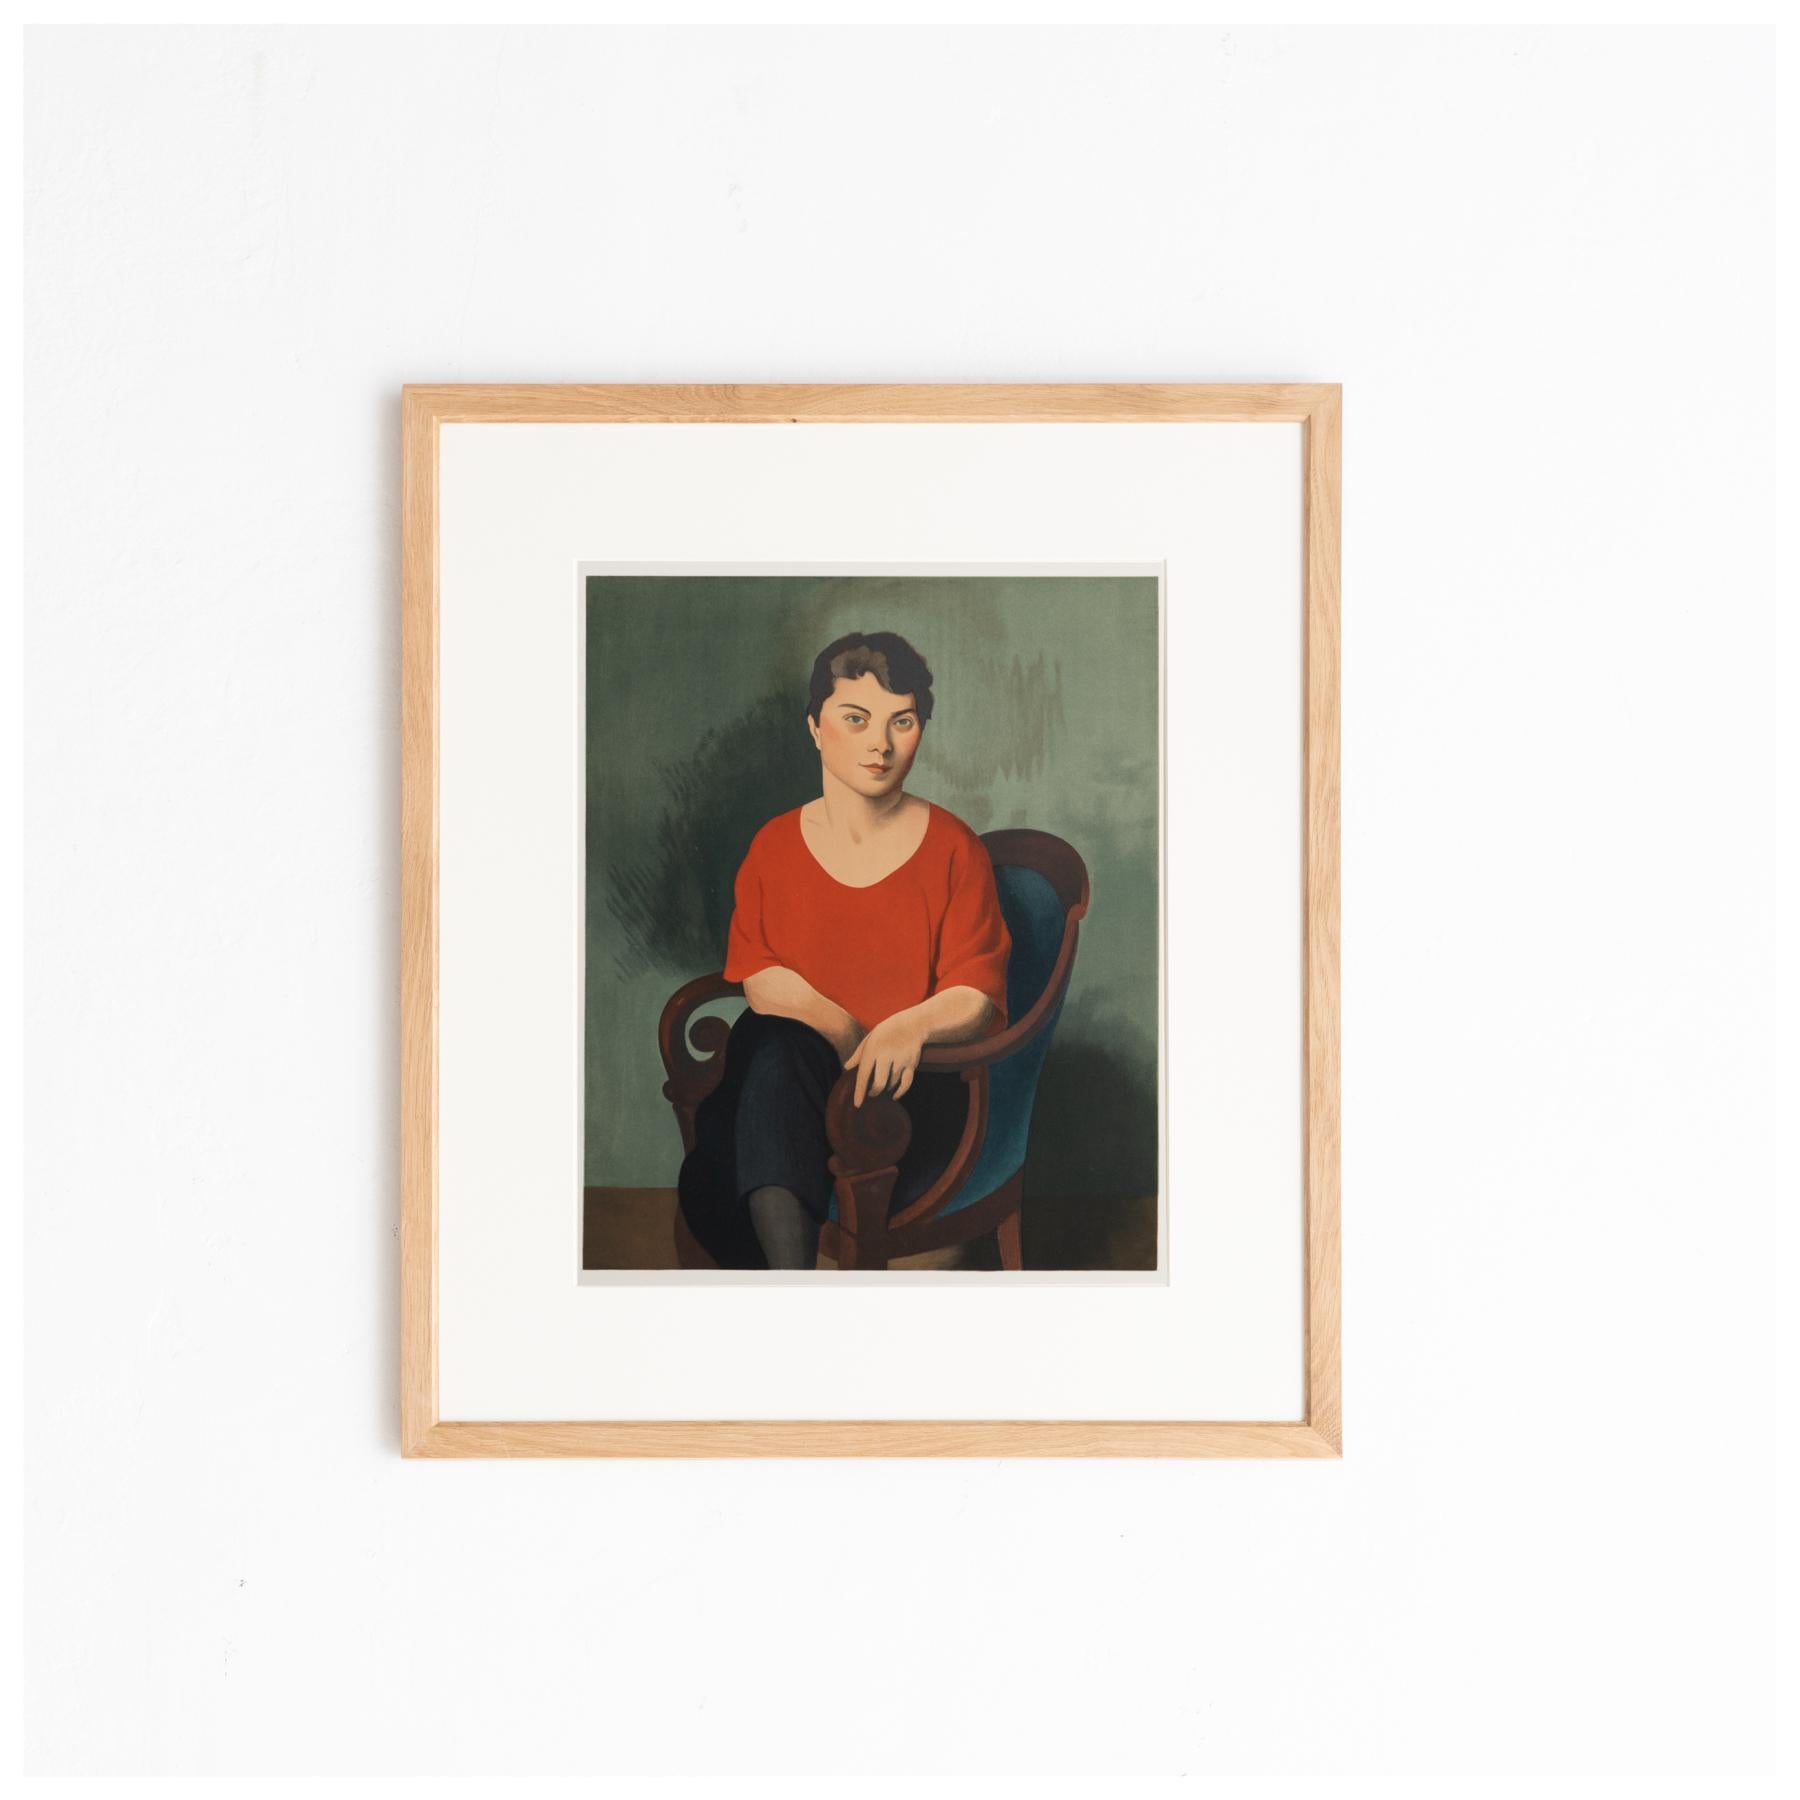 Original color lithograph 'La Roumaine' by Roger de la Fresnaye.

Lithograph printed from an original painting made by the author in France, circa 1921.

Published in France by Fernand Mourlot, circa 1968. 

In good original condition, with